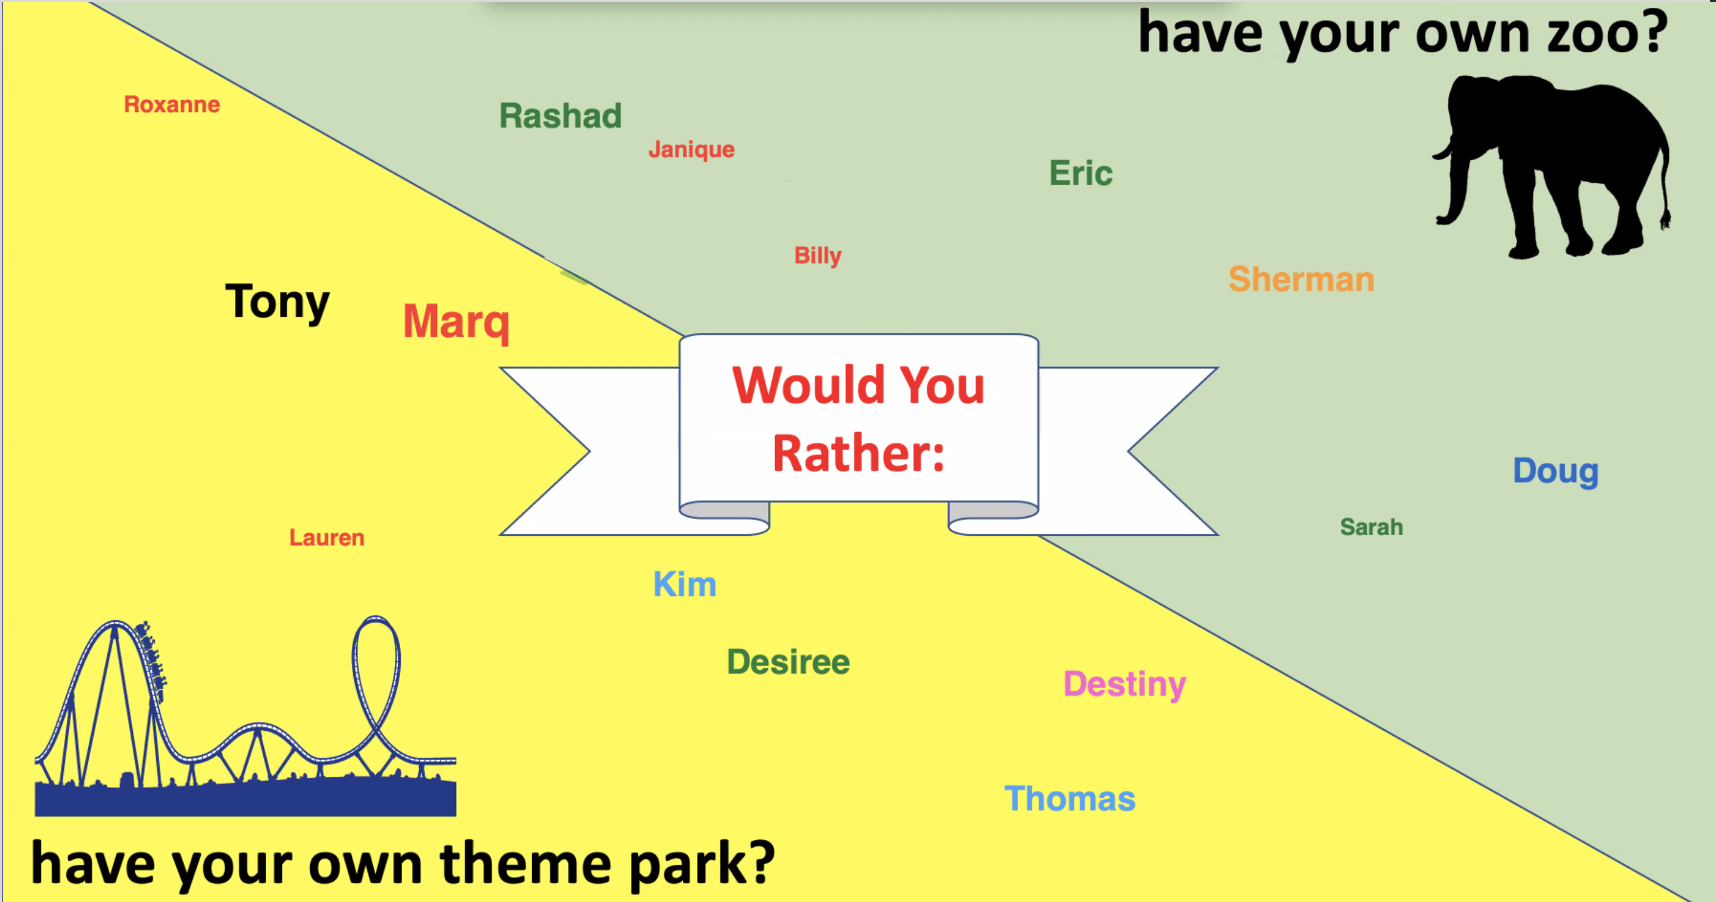 sample would you rather powerpoint template with left side of the screen in yellow that says would you rather have your own theme park and right side in green says would you rather have your own zoo; various student names are typed on the screen